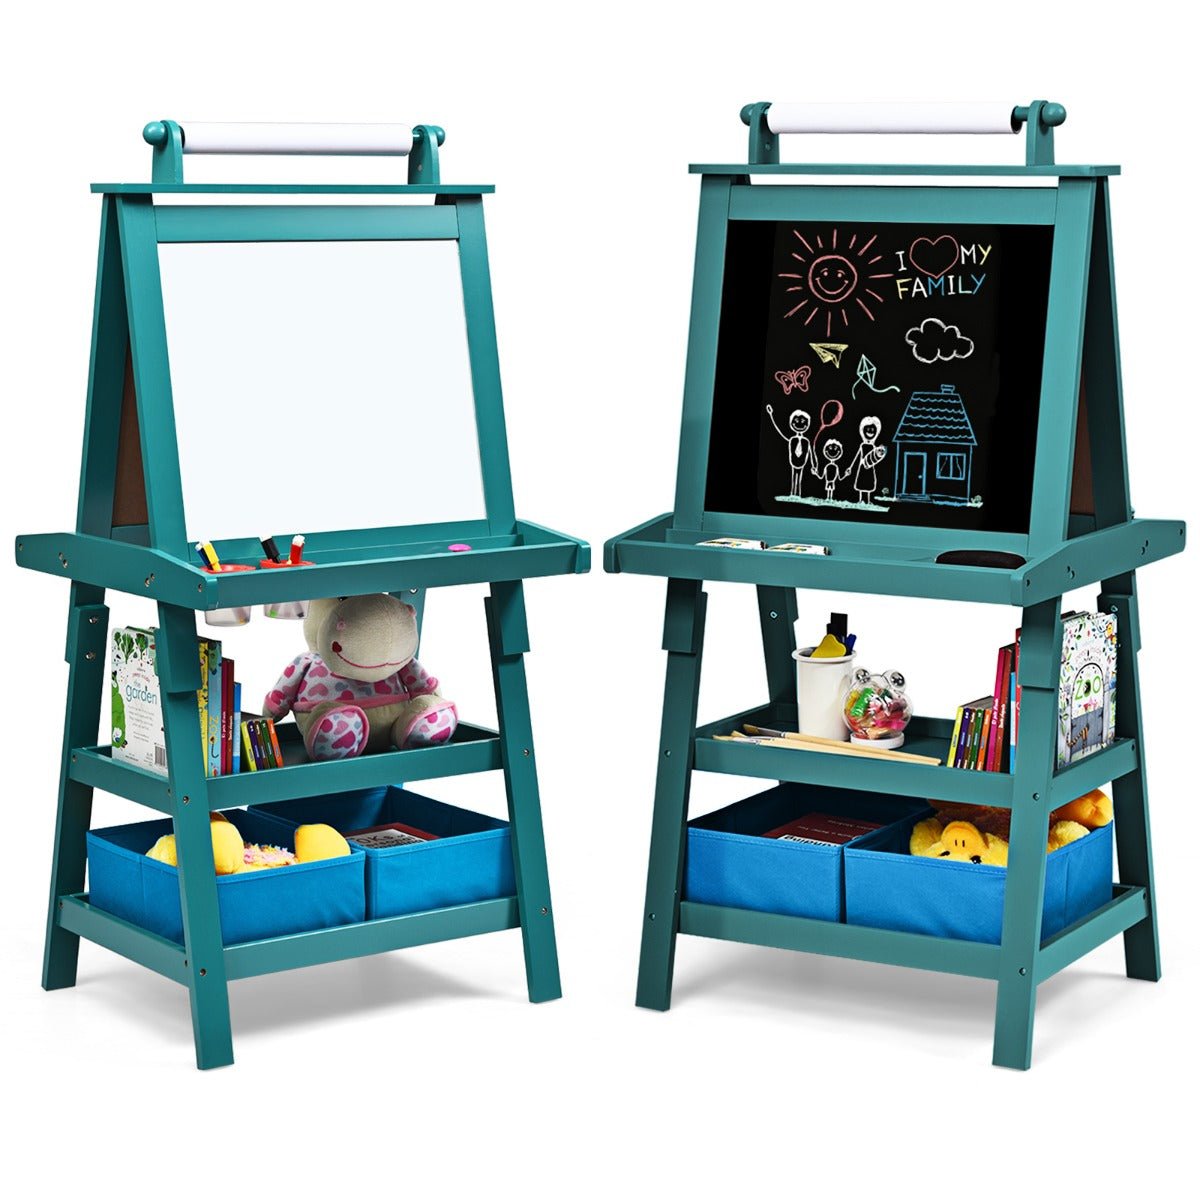 Shop Teal Blue Double Sided Easel - Unleash Your Child's Creativity